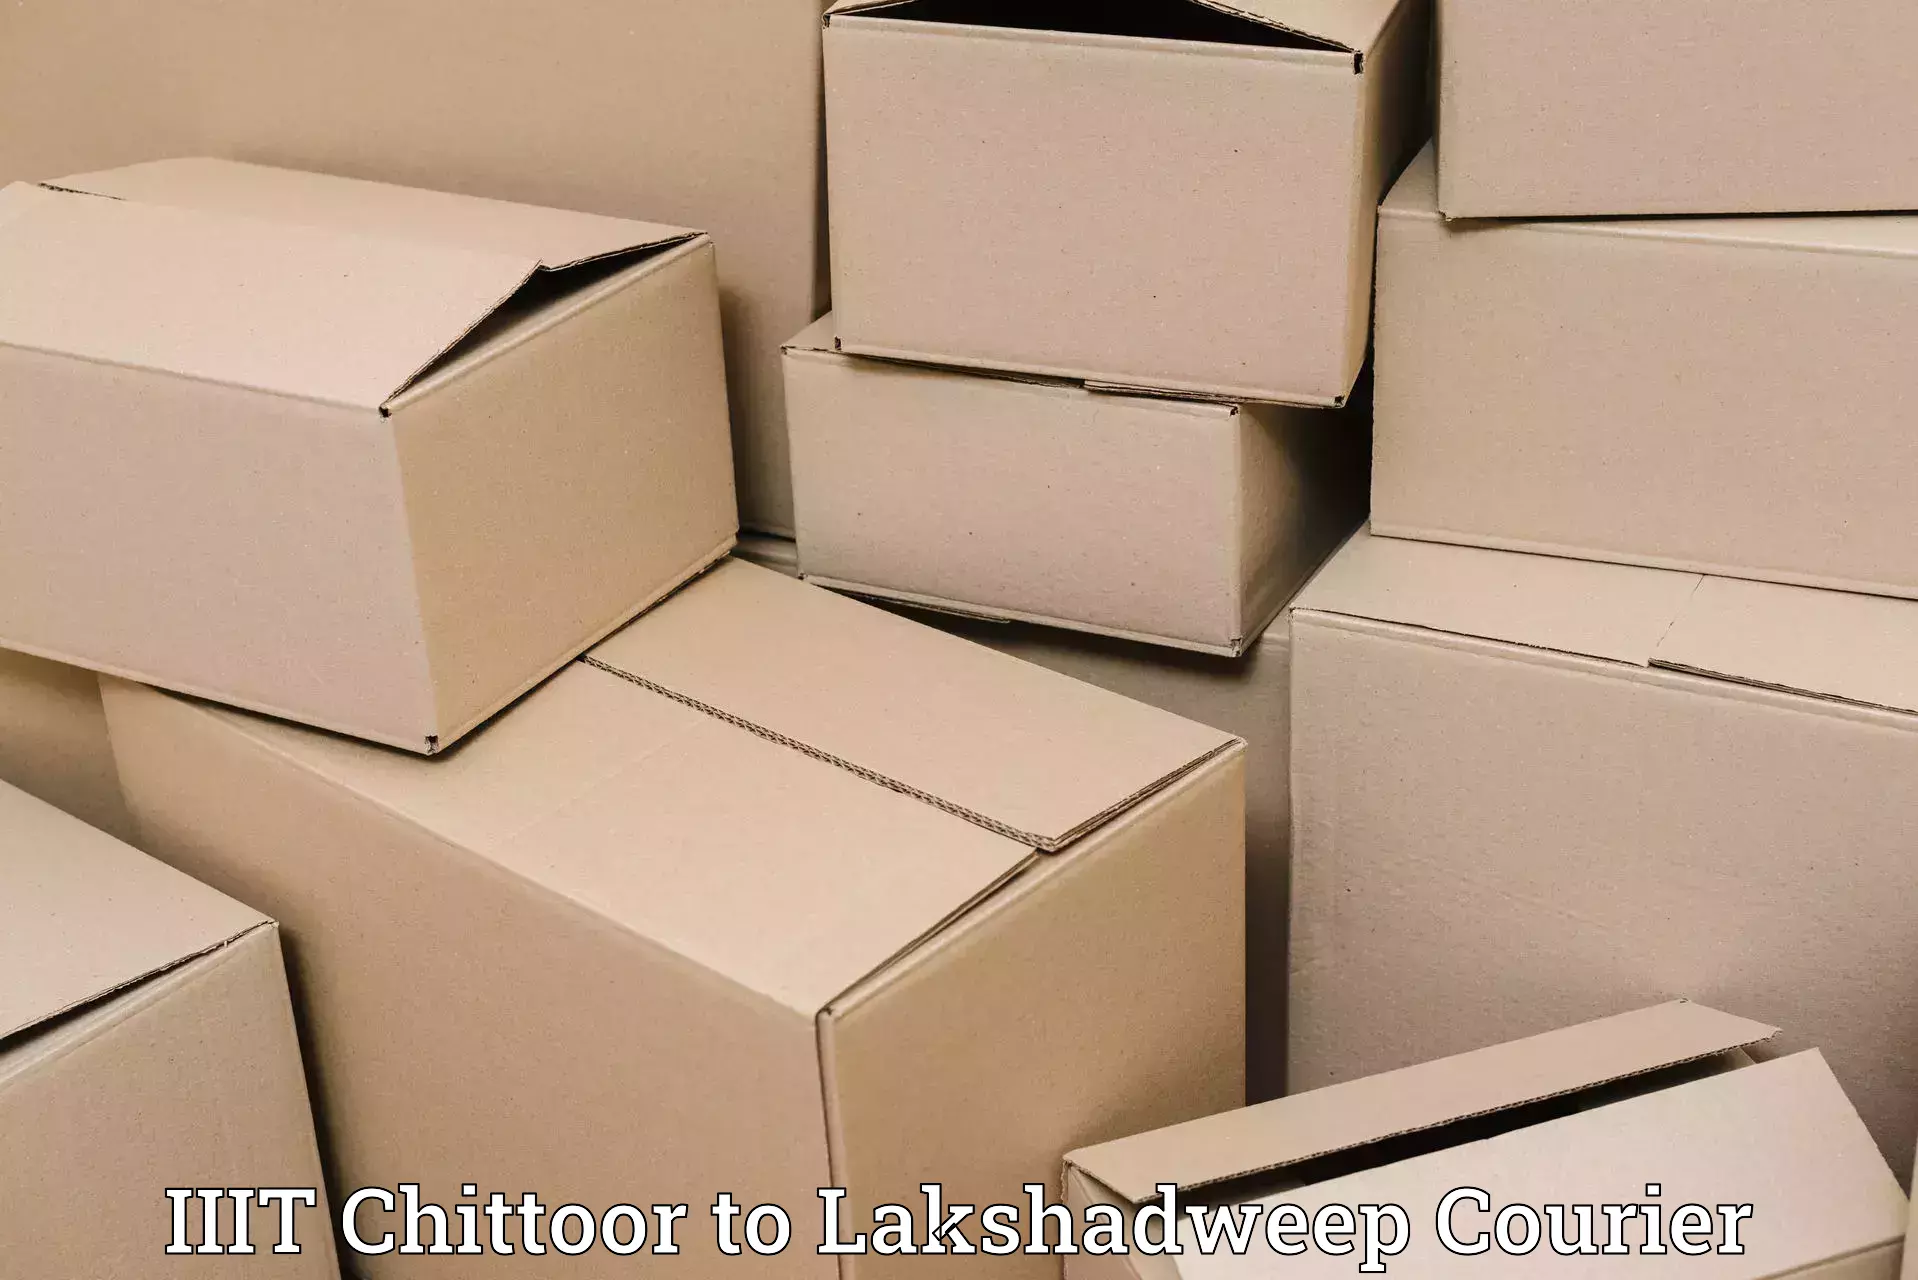 Nationwide shipping coverage IIIT Chittoor to Lakshadweep